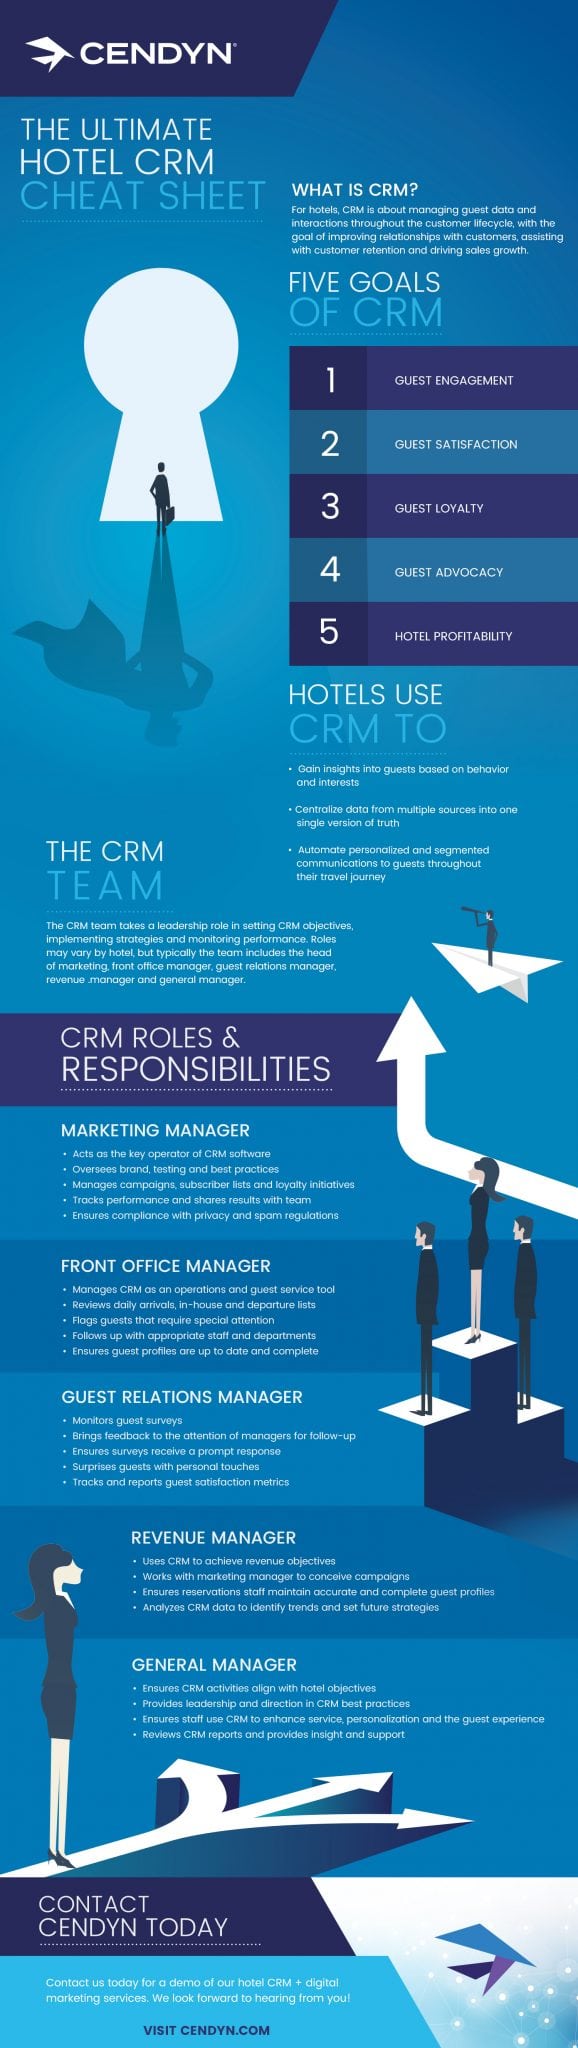 How to manage the CRM at your hotel